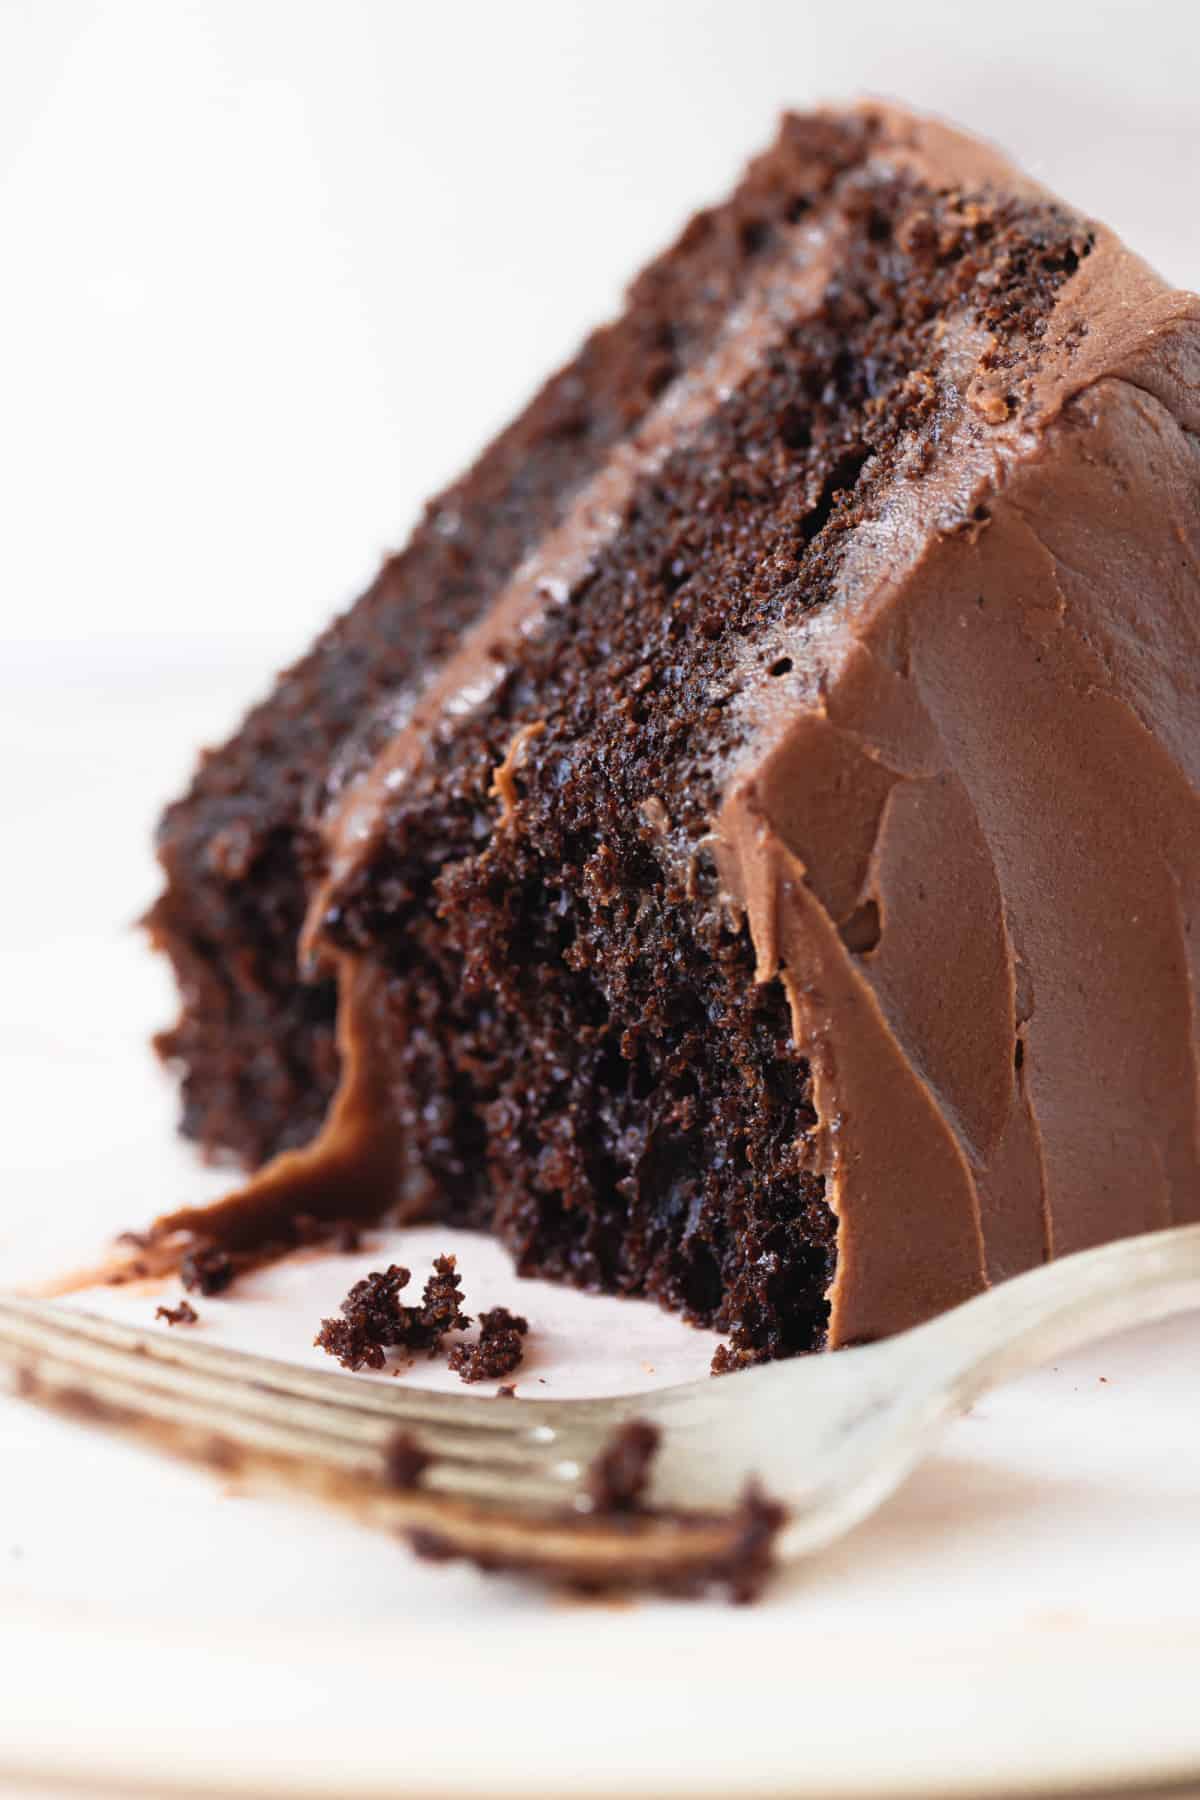 A slice of eaten frosted chocolate layer cake on white plate and background, a silver fork